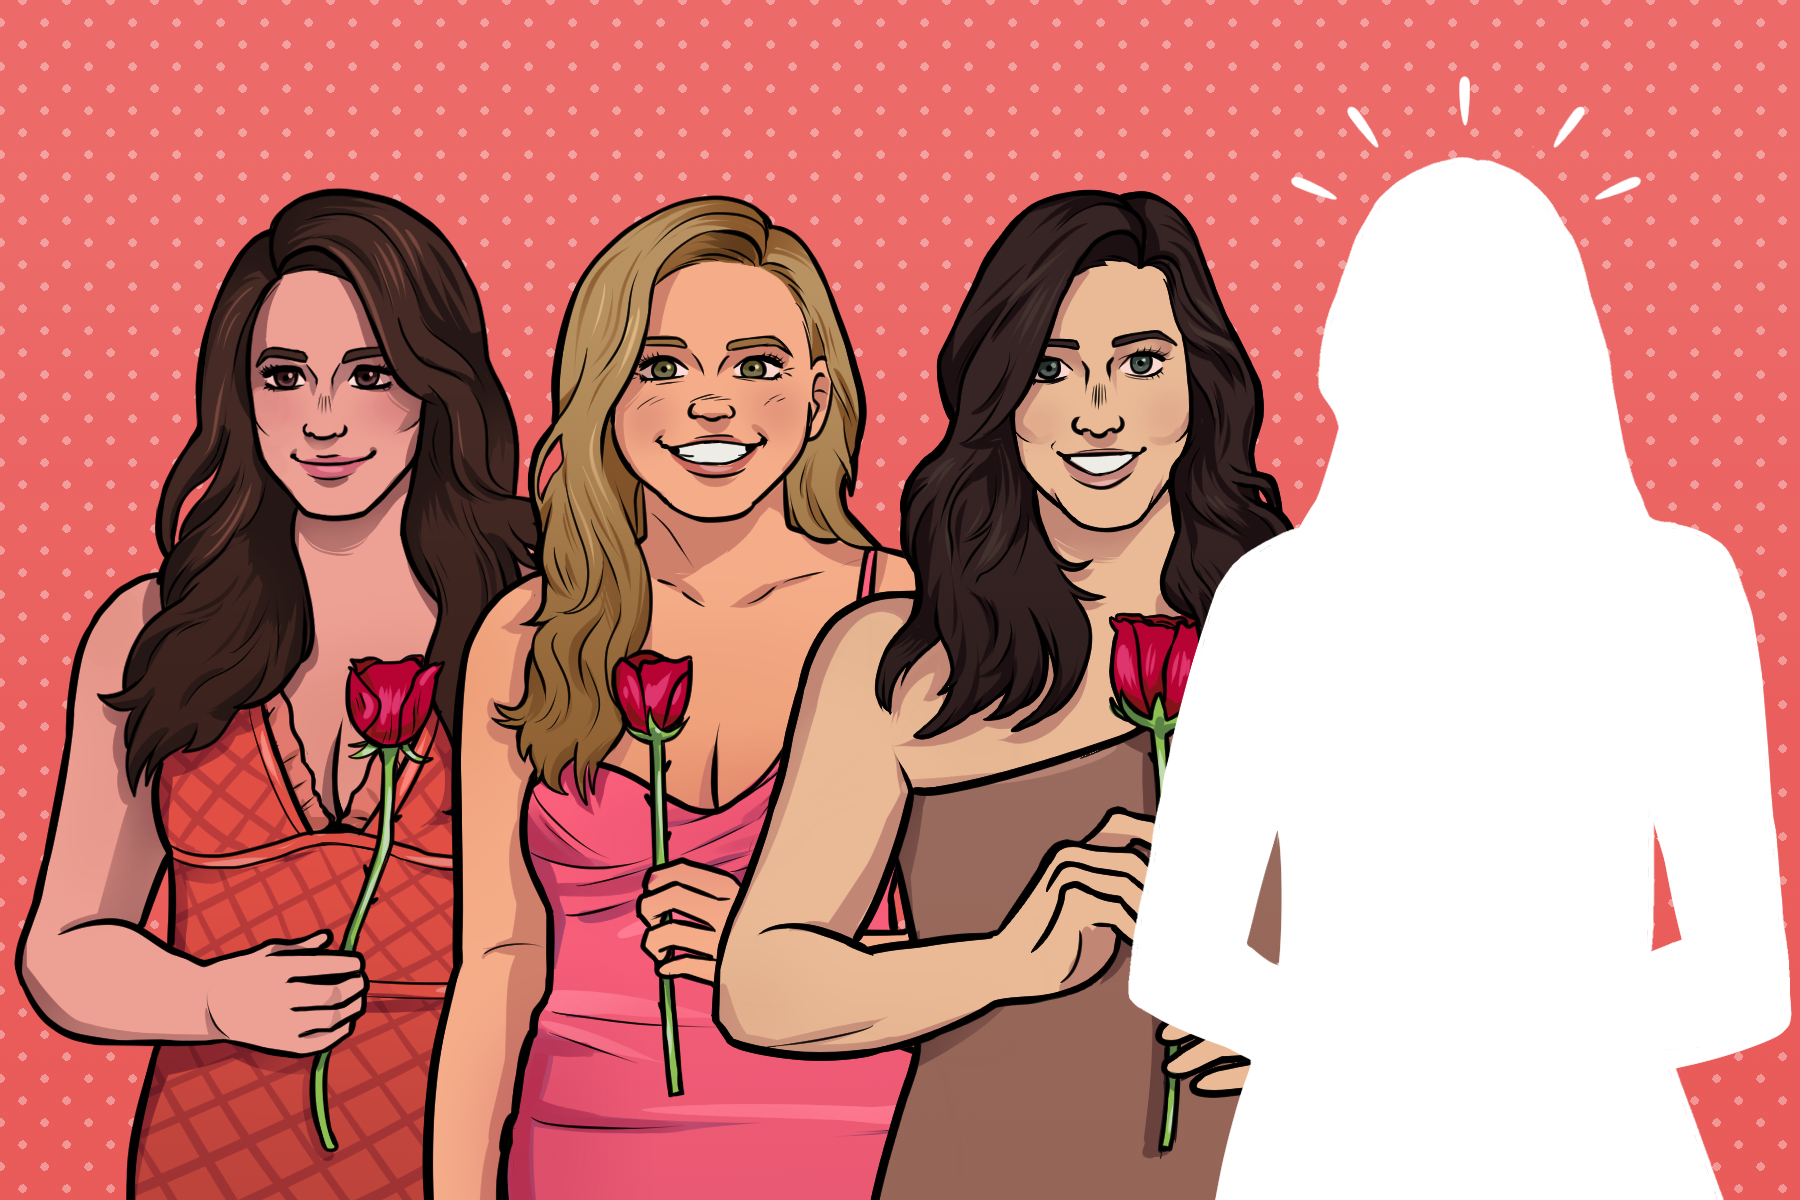 In an article about "The Bachelorette", an illustration of three women and a missing woman silhouette